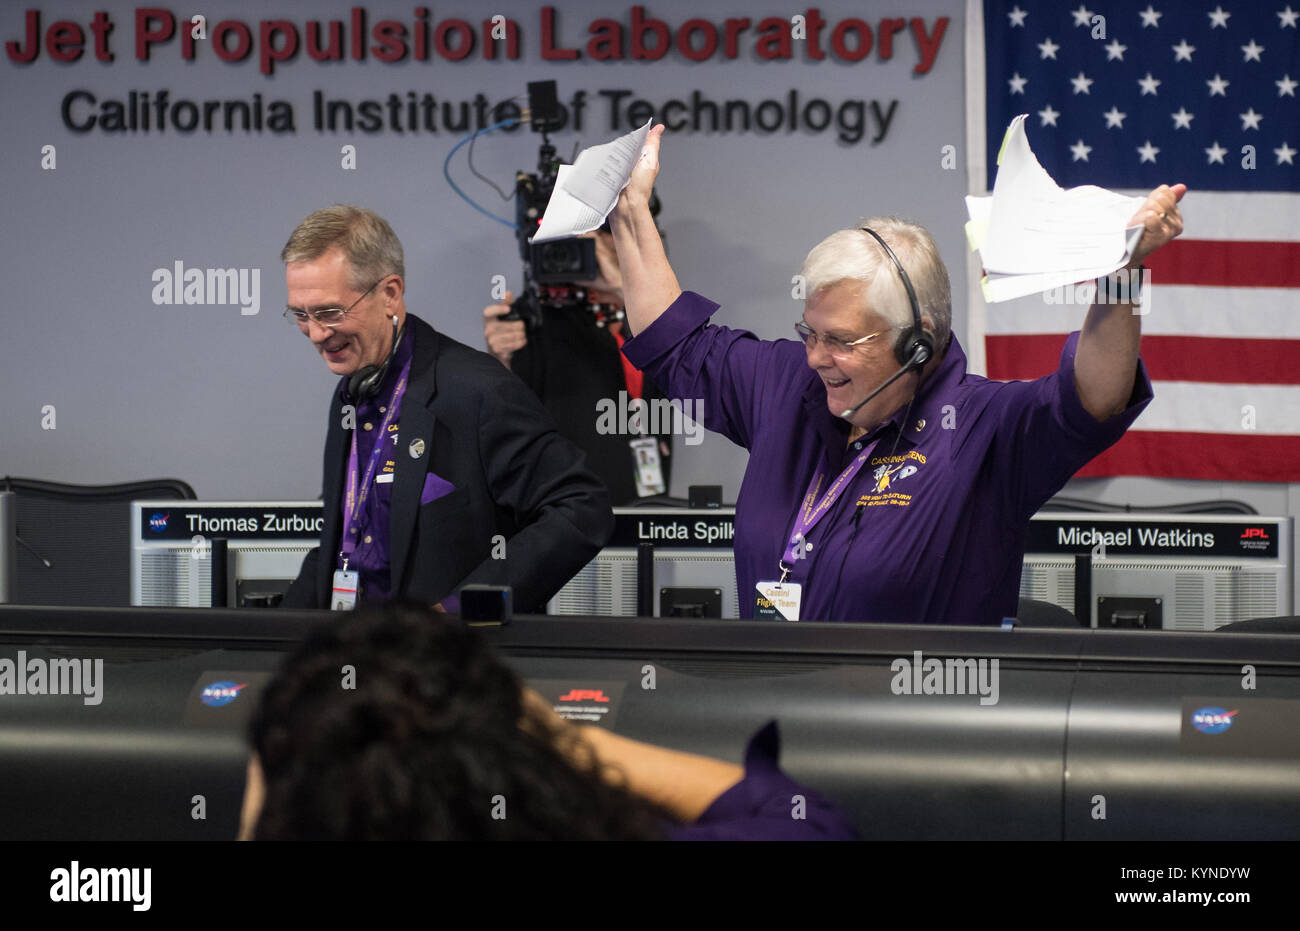 Spacecraft operations team manager for the Cassini mission at Saturn, Julie Webster, rips up the final contingency plan for the Cassini mission, Friday, Sept. 15, 2017 in mission control at NASA's Jet Propulsion Laboratory in Pasadena, California. Since its arrival in 2004, the Cassini-Huygens mission has been a discovery machine, revolutionizing our knowledge of the Saturn system and captivating us with data and images never before obtained with such detail and clarity. On Sept. 15, 2017, operators deliberately plunged the spacecraft into Saturn, as Cassini gathered science until the end. Los Stock Photo